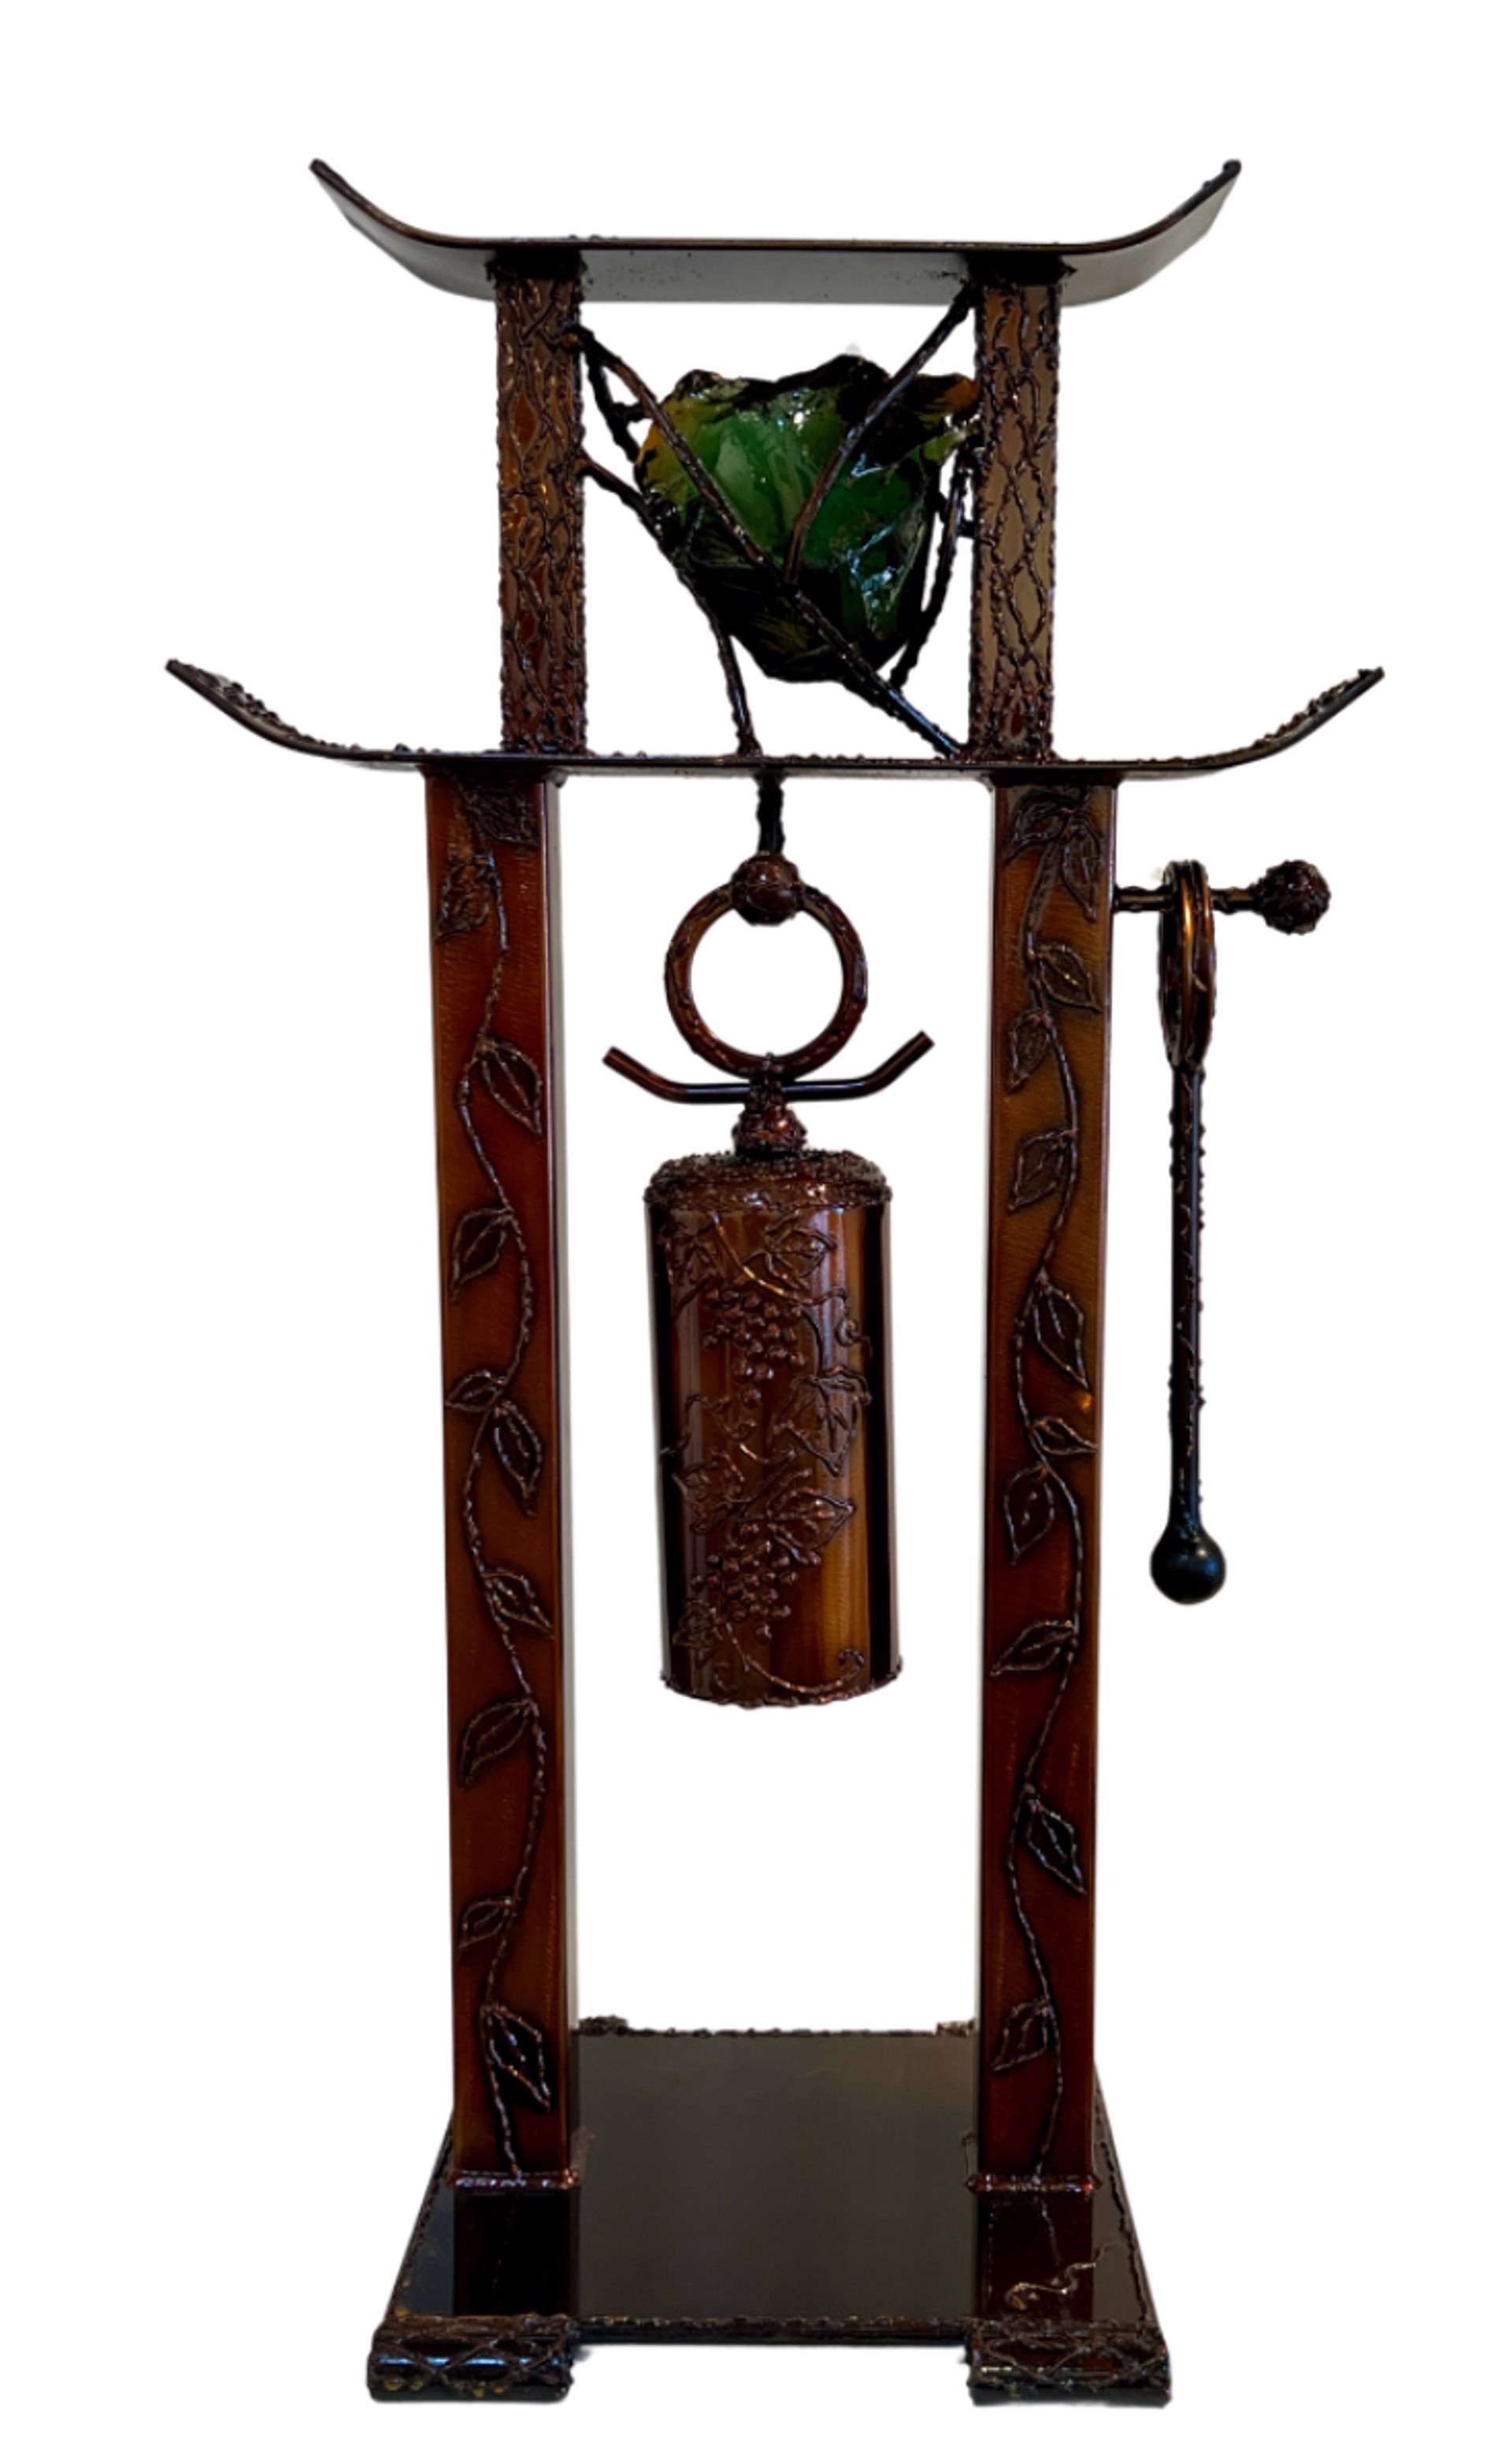 Desktop Bell Sculpture with Grapes  Square Top with Green Glass by Mike Beals